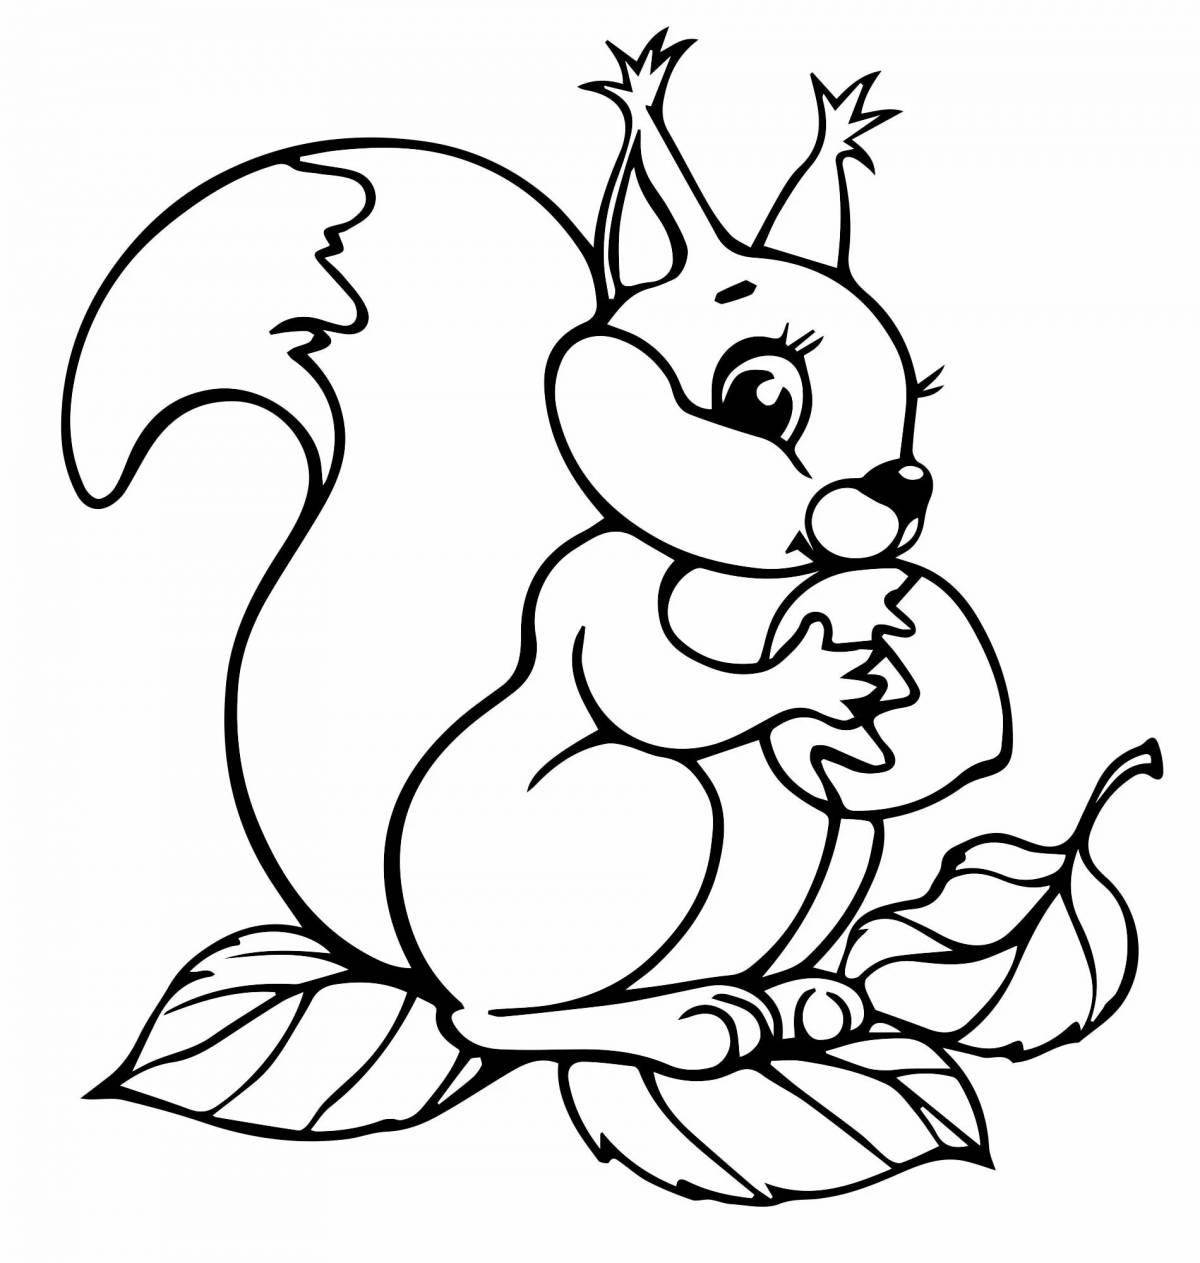 Squirrel playful coloring for kids